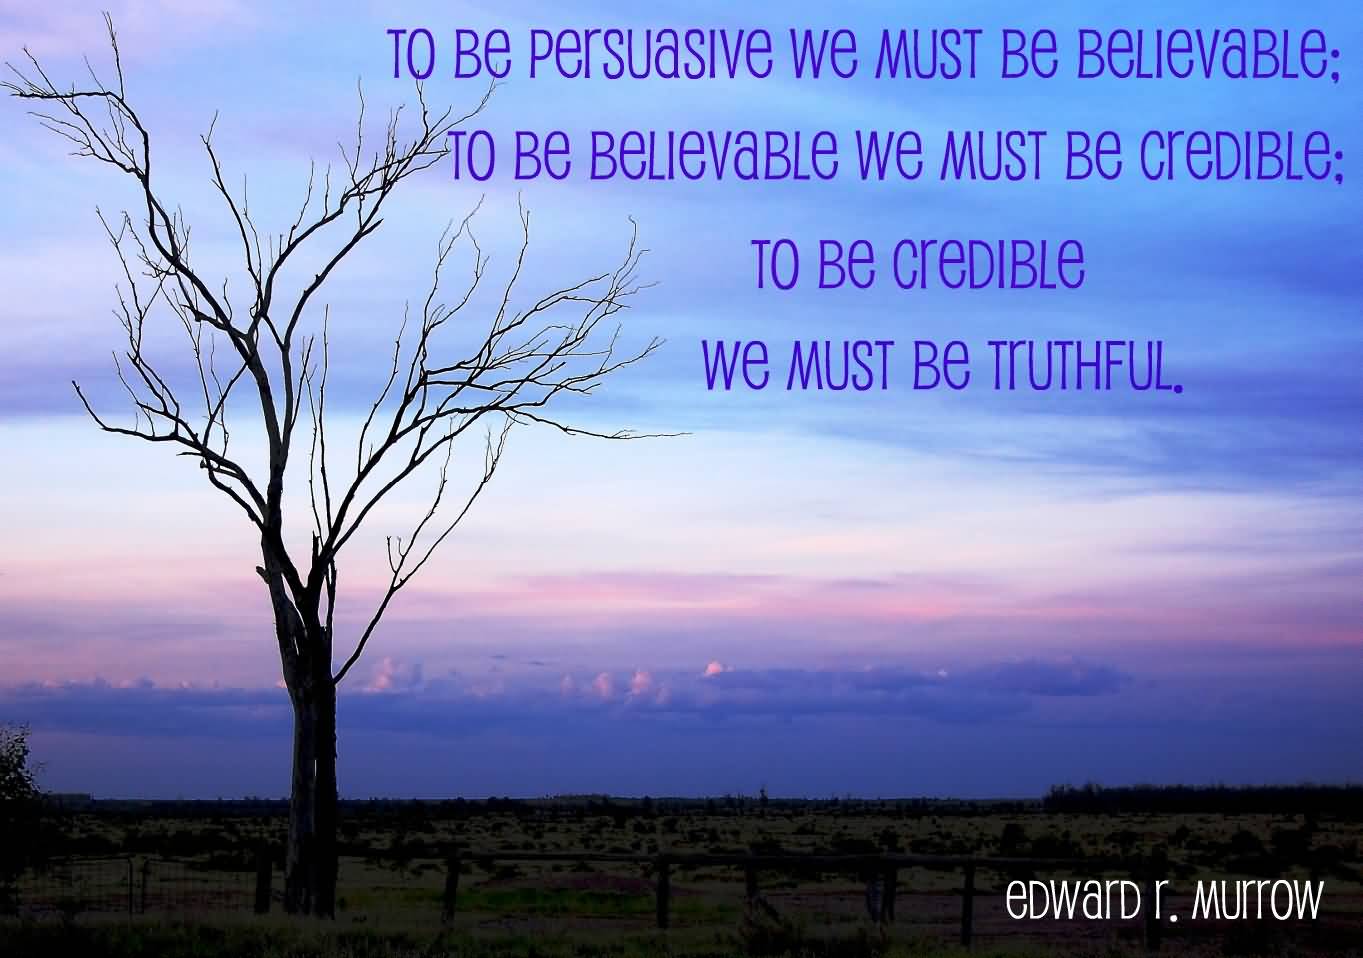 To be persuasive we must be believable; to be believable we must be credible; credible we must be truthful. Edward R. Murrow